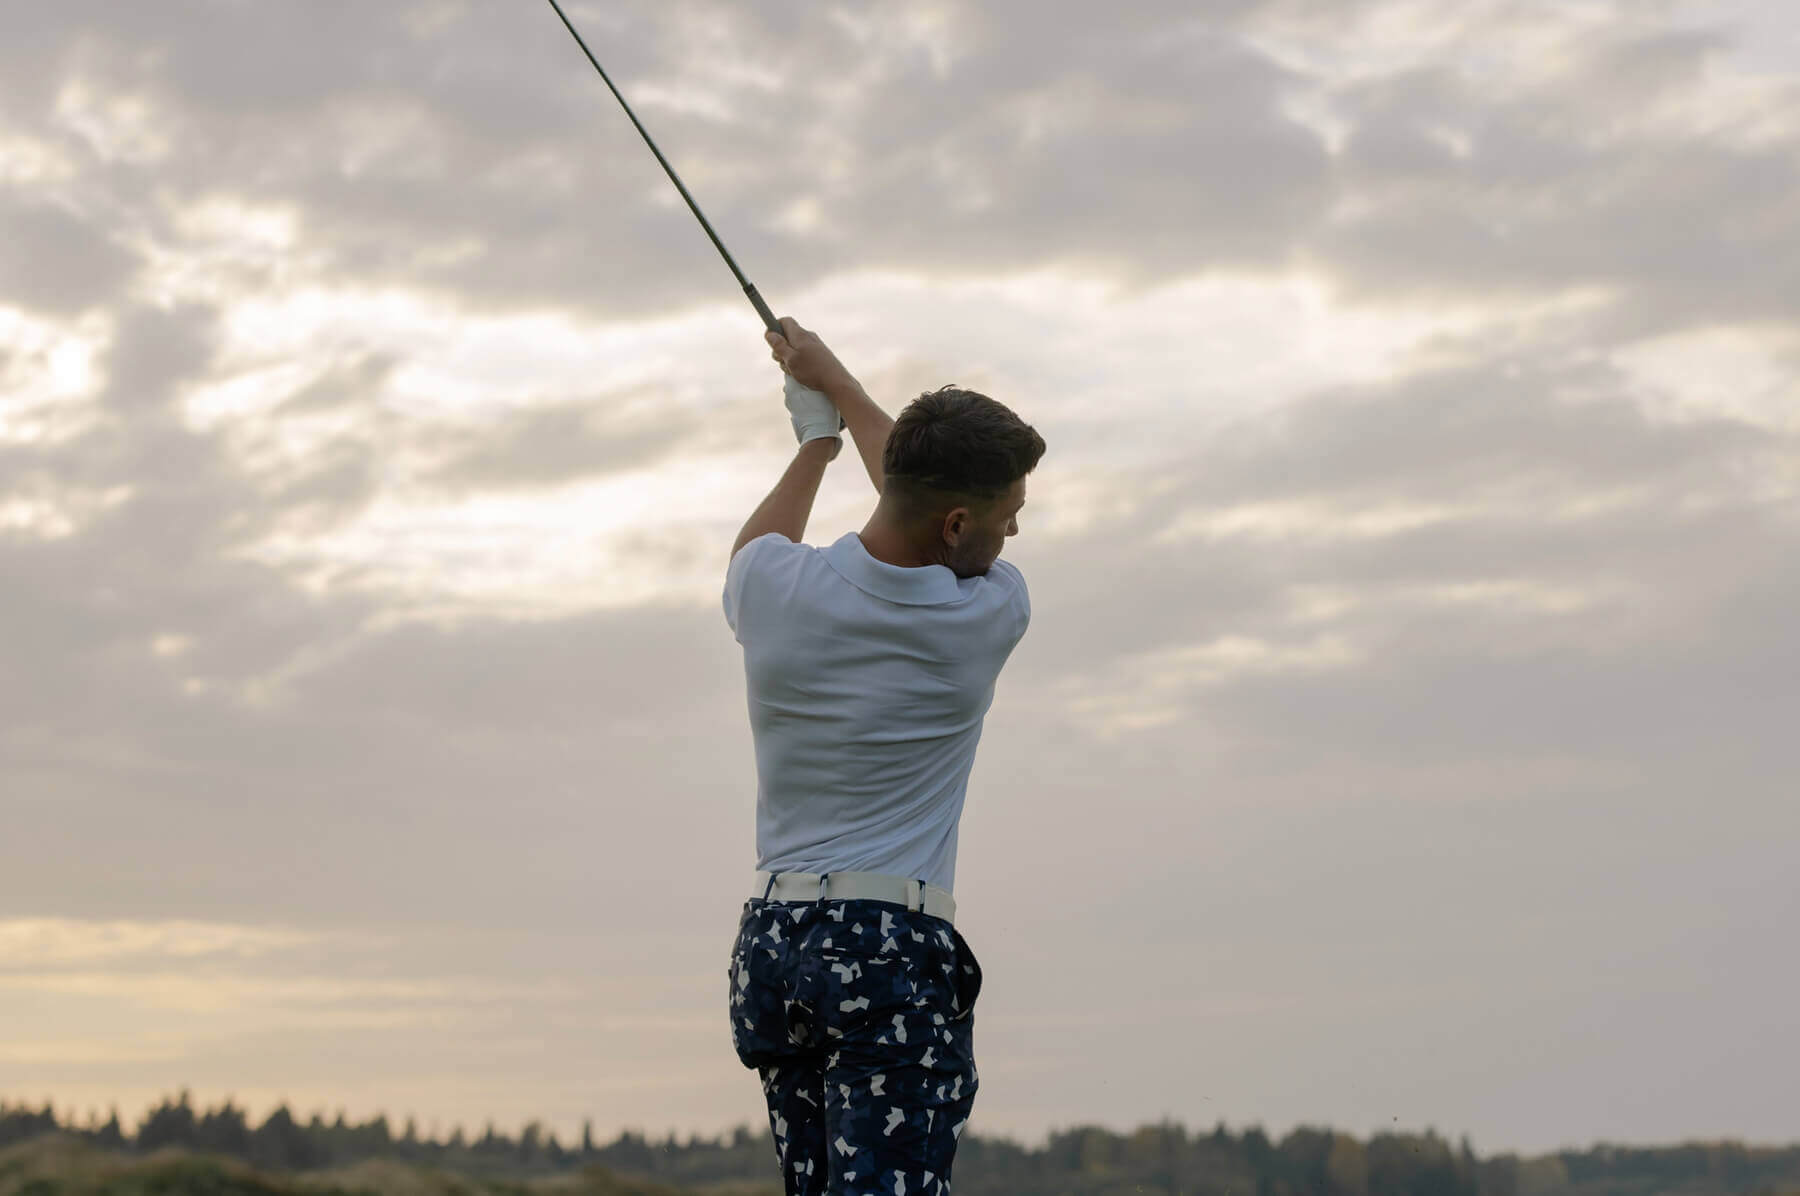 8 Great Ways to Stay Positive on the Golf Course